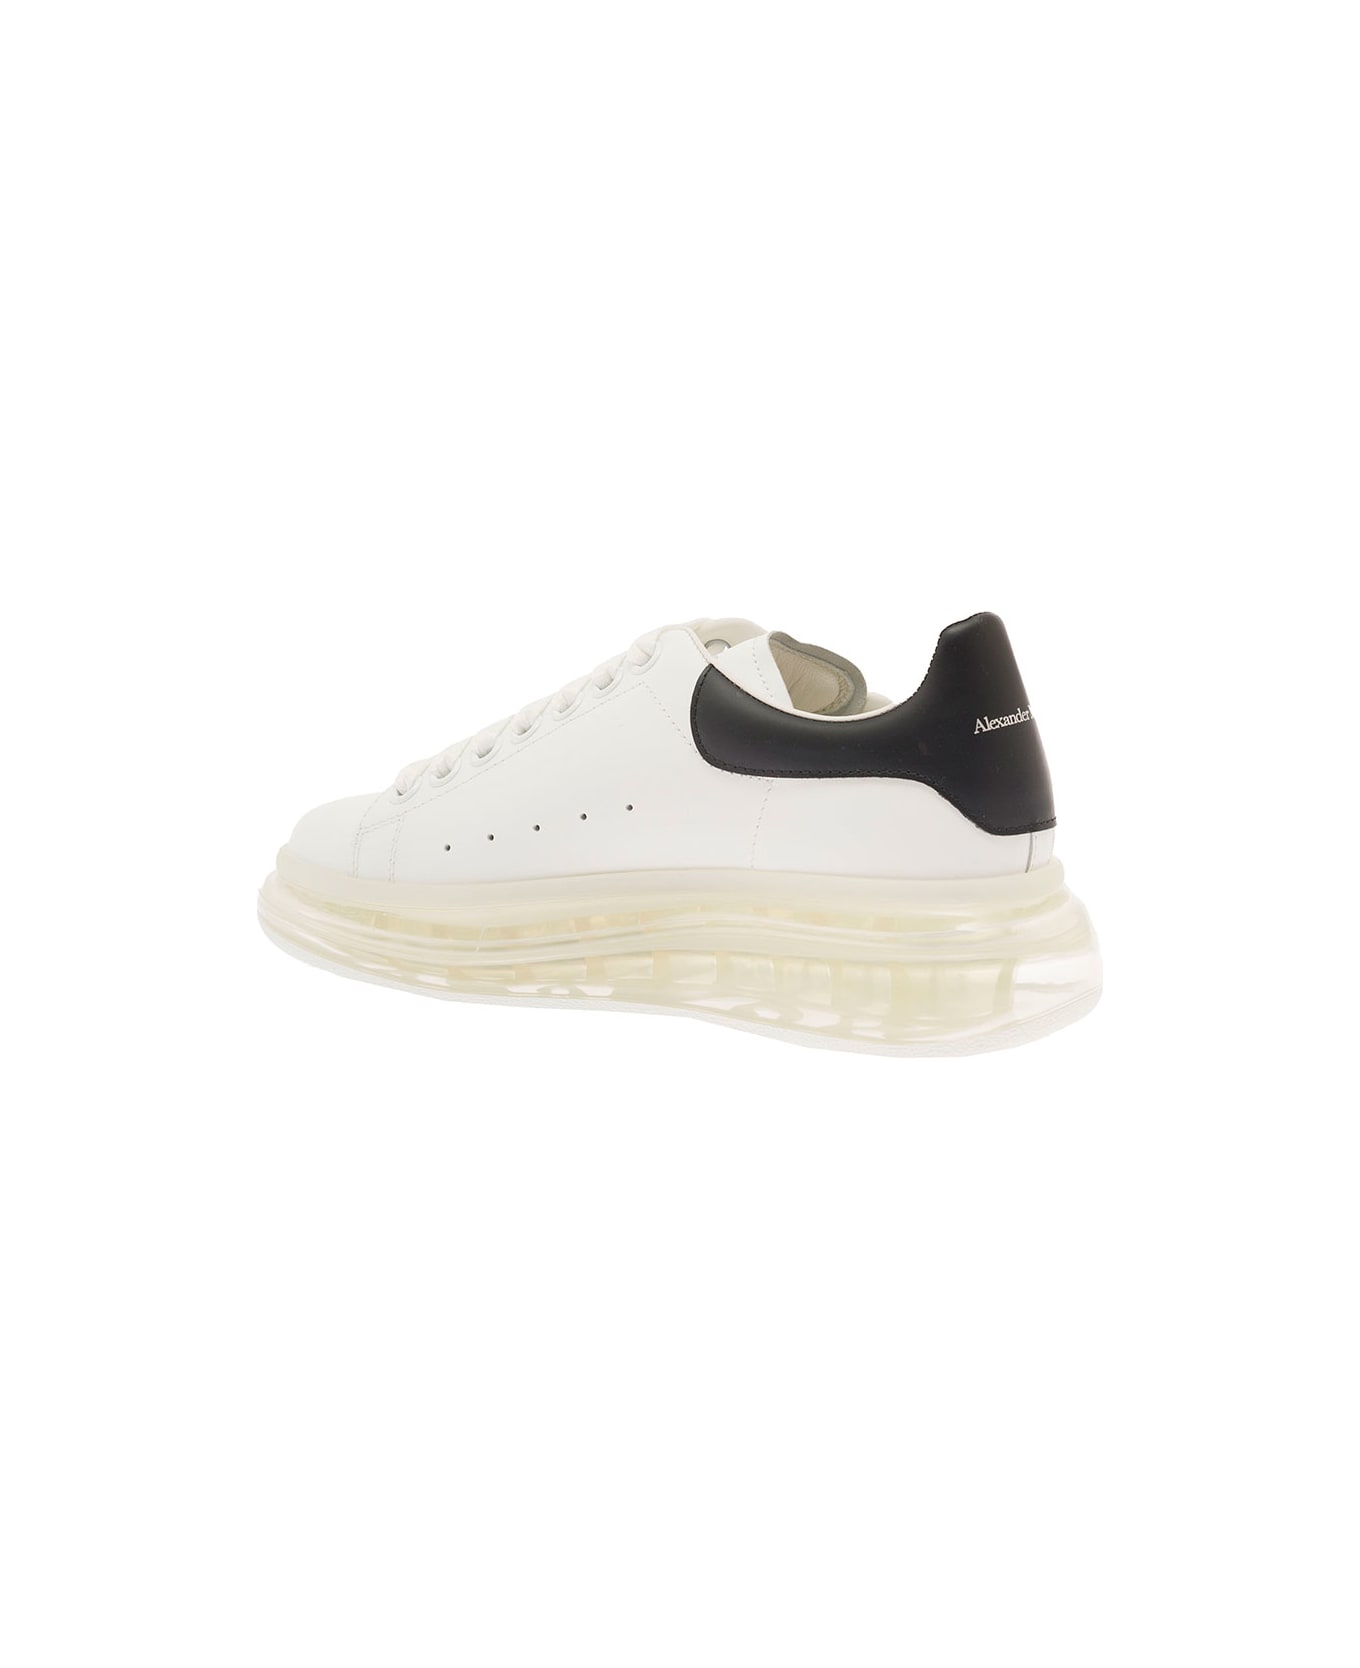 Alexander McQueen Transaparent Big Sole White Sneakers In Leather Man - White ウェッジシューズ